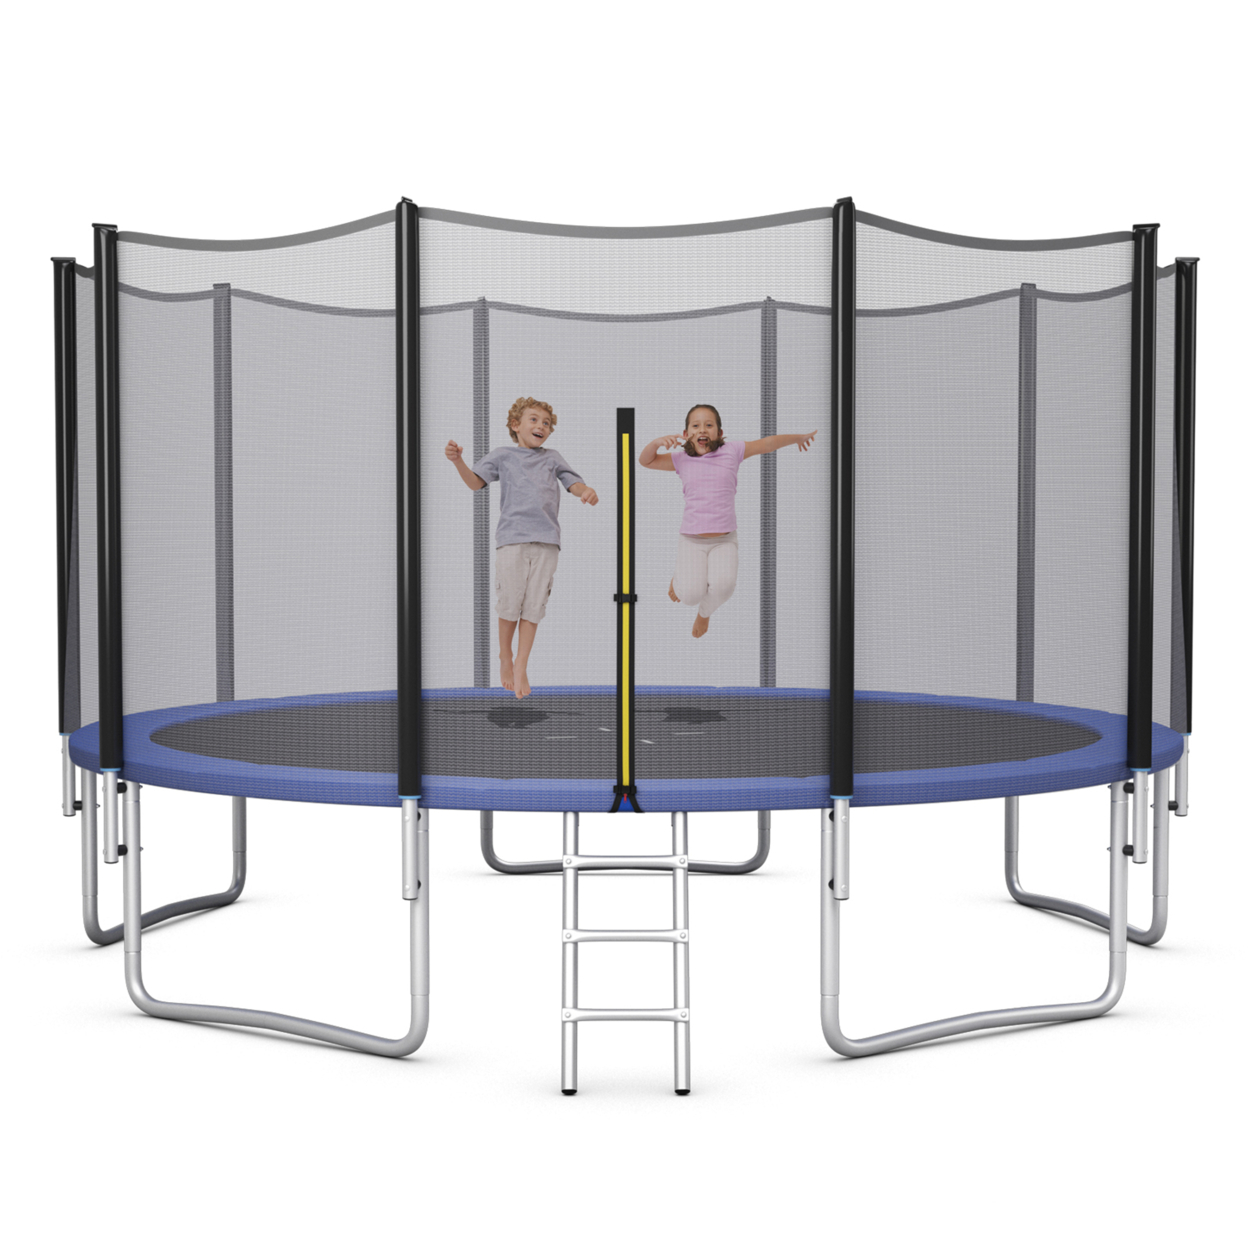 8/10/12/14/15/16 FT Outdoor Trampoline Bounce Combo W/Safety Closure Net Ladder - Black, 8 Ft